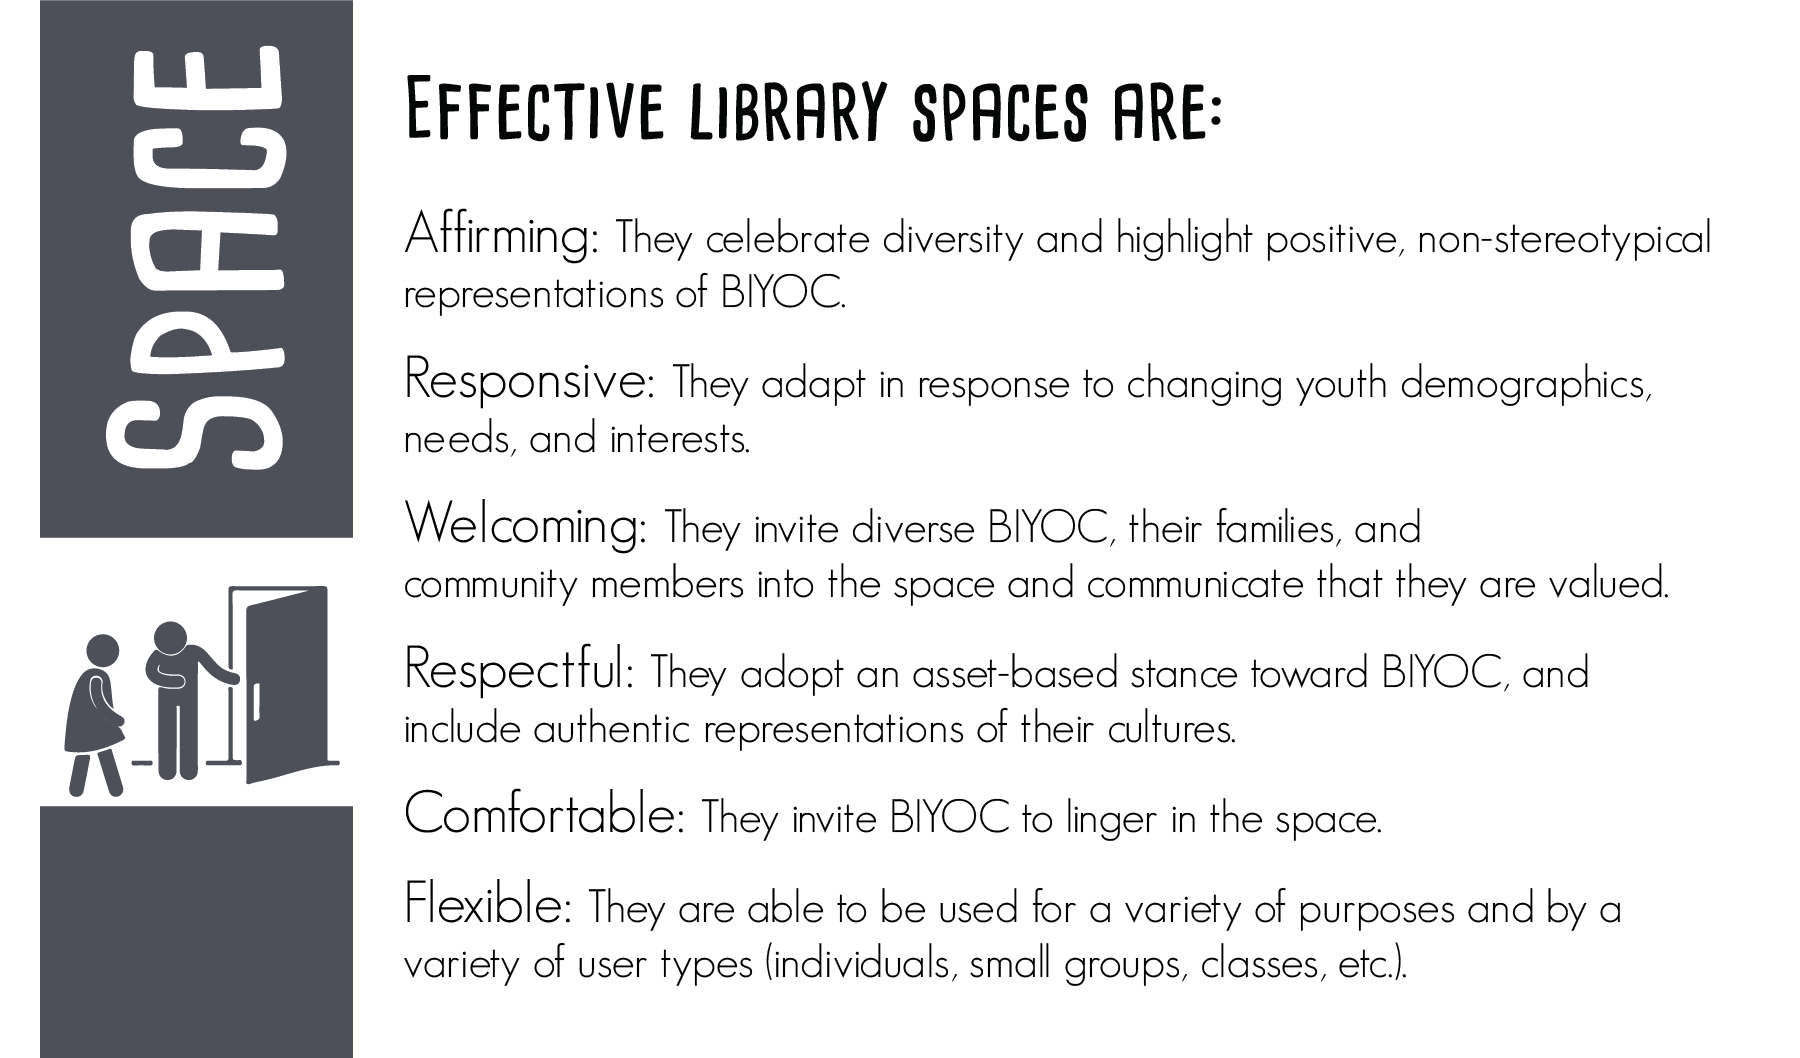 Effective library spaces are: Affirming: They celebrate diversity and highlight positive, non-stereotypical representations of diverse children and teens. Responsive: They adapt in response to changing youth demographics, needs, and interests. Welcoming: They invite BIYOC, their families, and community members into the space and communicate that they are valued. Respectful: They adopt an asset-based stance toward BIYOC, and include authentic representations of their cultures. Comfortable: They invite BIYOC to linger in the space. Flexible: They are able to be used for a variety of purposes and by a variety of user types (individuals, small groups, classes, etc.).